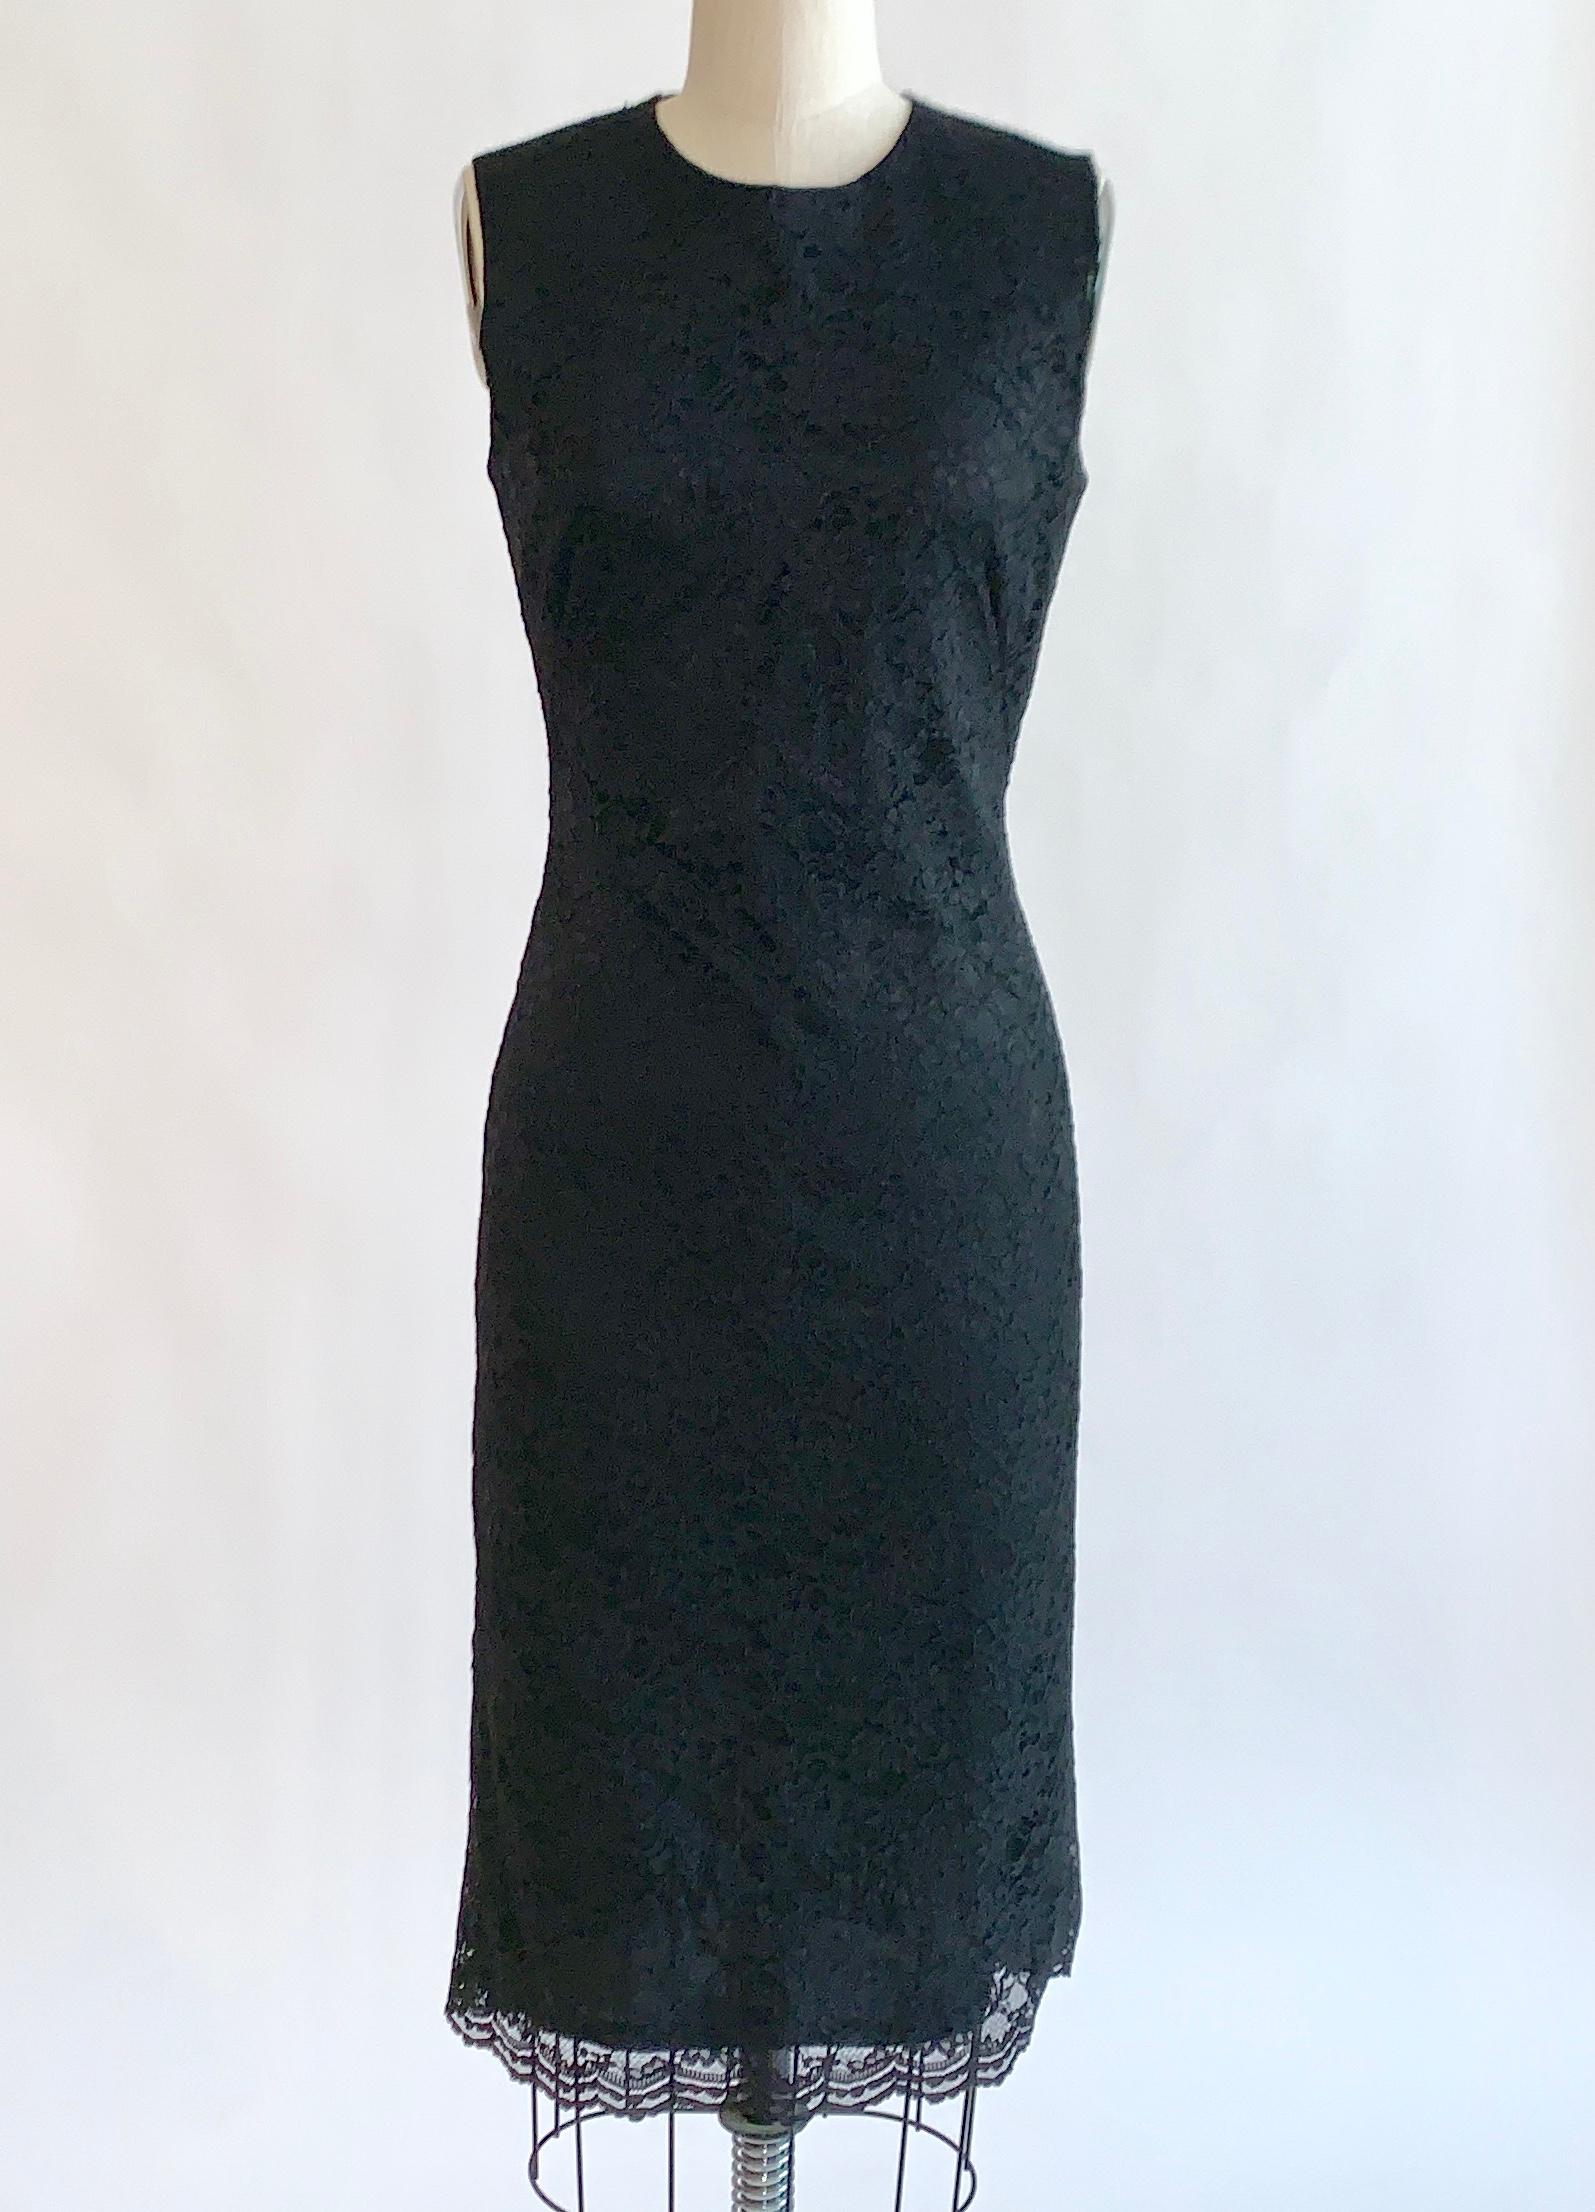 Alexander McQueen black lace sleeveless dress from the designer's Spring 1999 collection. Black calais lace atop a solid black lining. Sleeveless, center back zip. 

70% rayon, 30% nylon.

Made in Italy.

Size IT 42, usually US 6, but seems to best